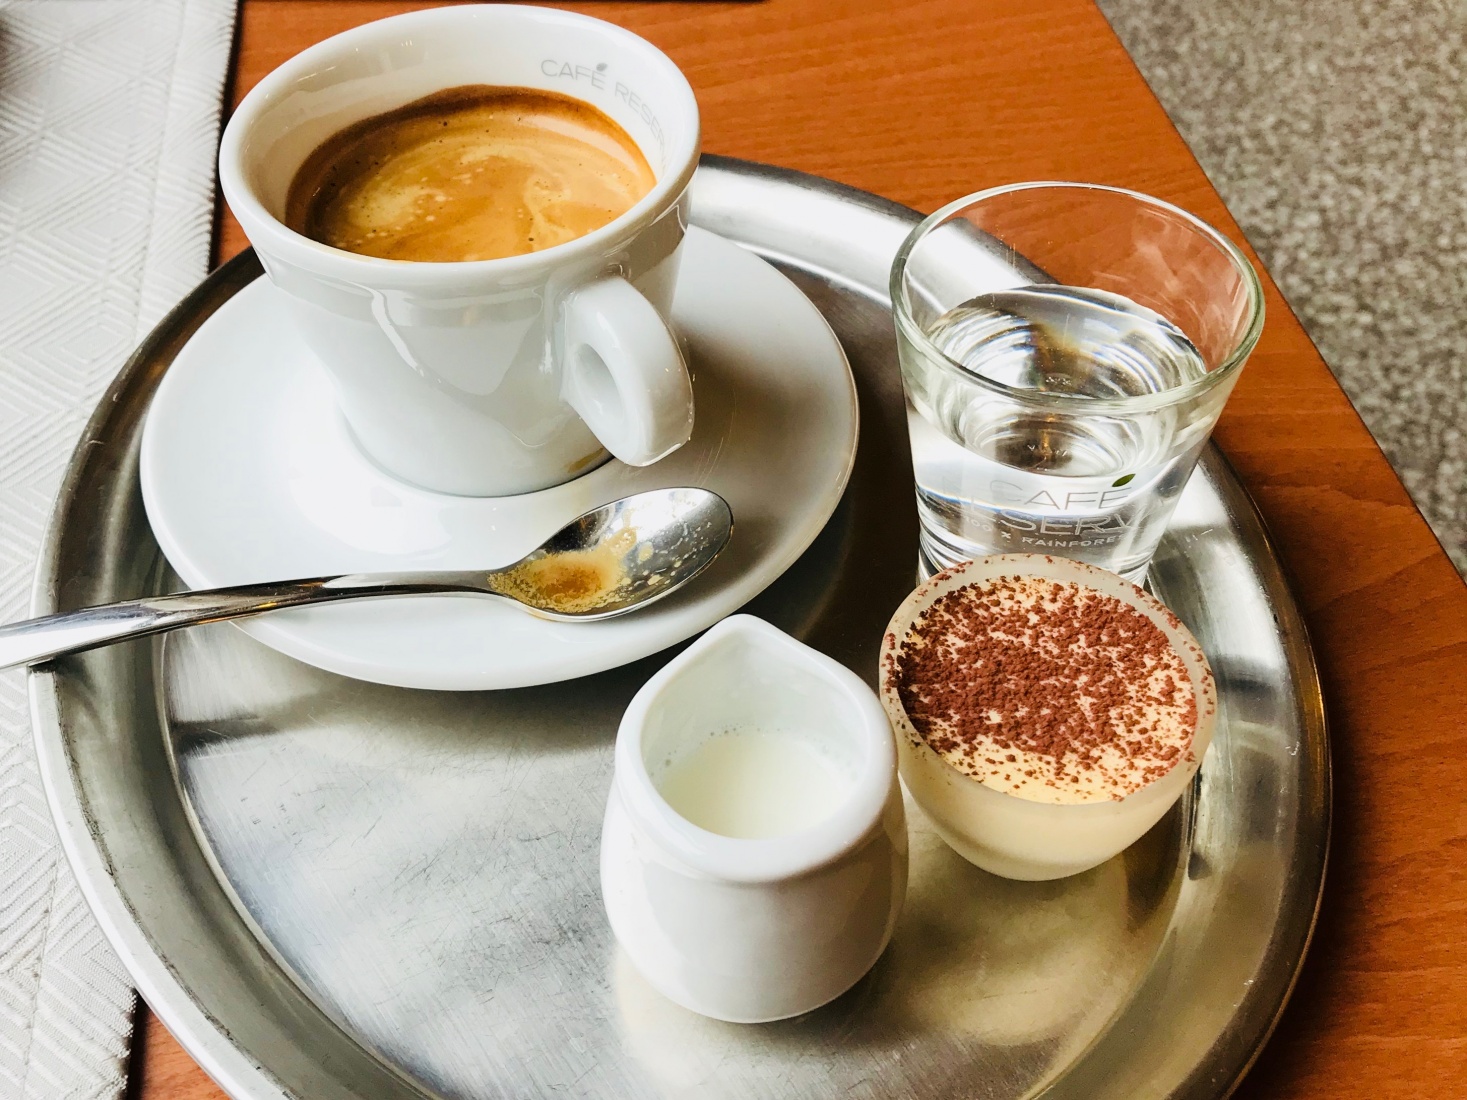 Coffee at J&T Banka Café (former Cafe Elektra), served with a small cup of tiramisu, in Ostrava, Czech Republic.